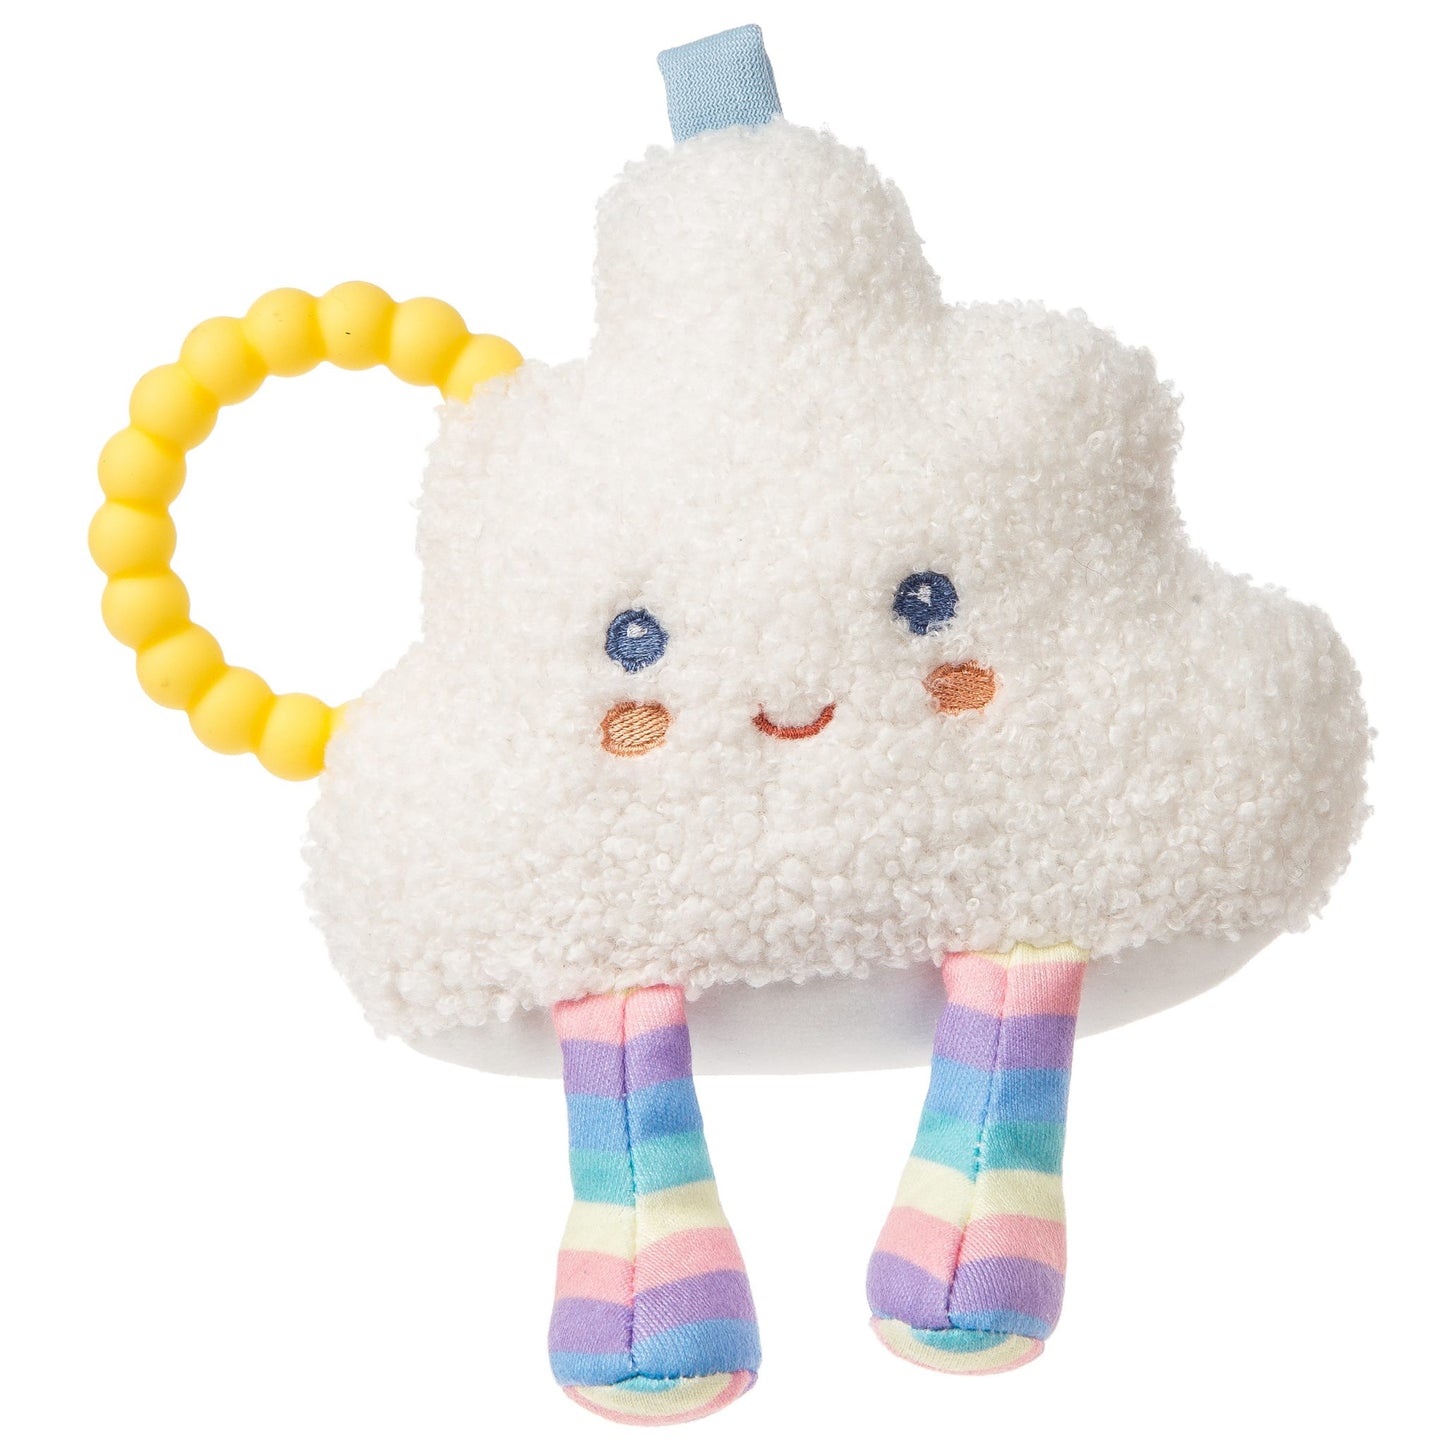 Puffy Cloud Teether Rattle